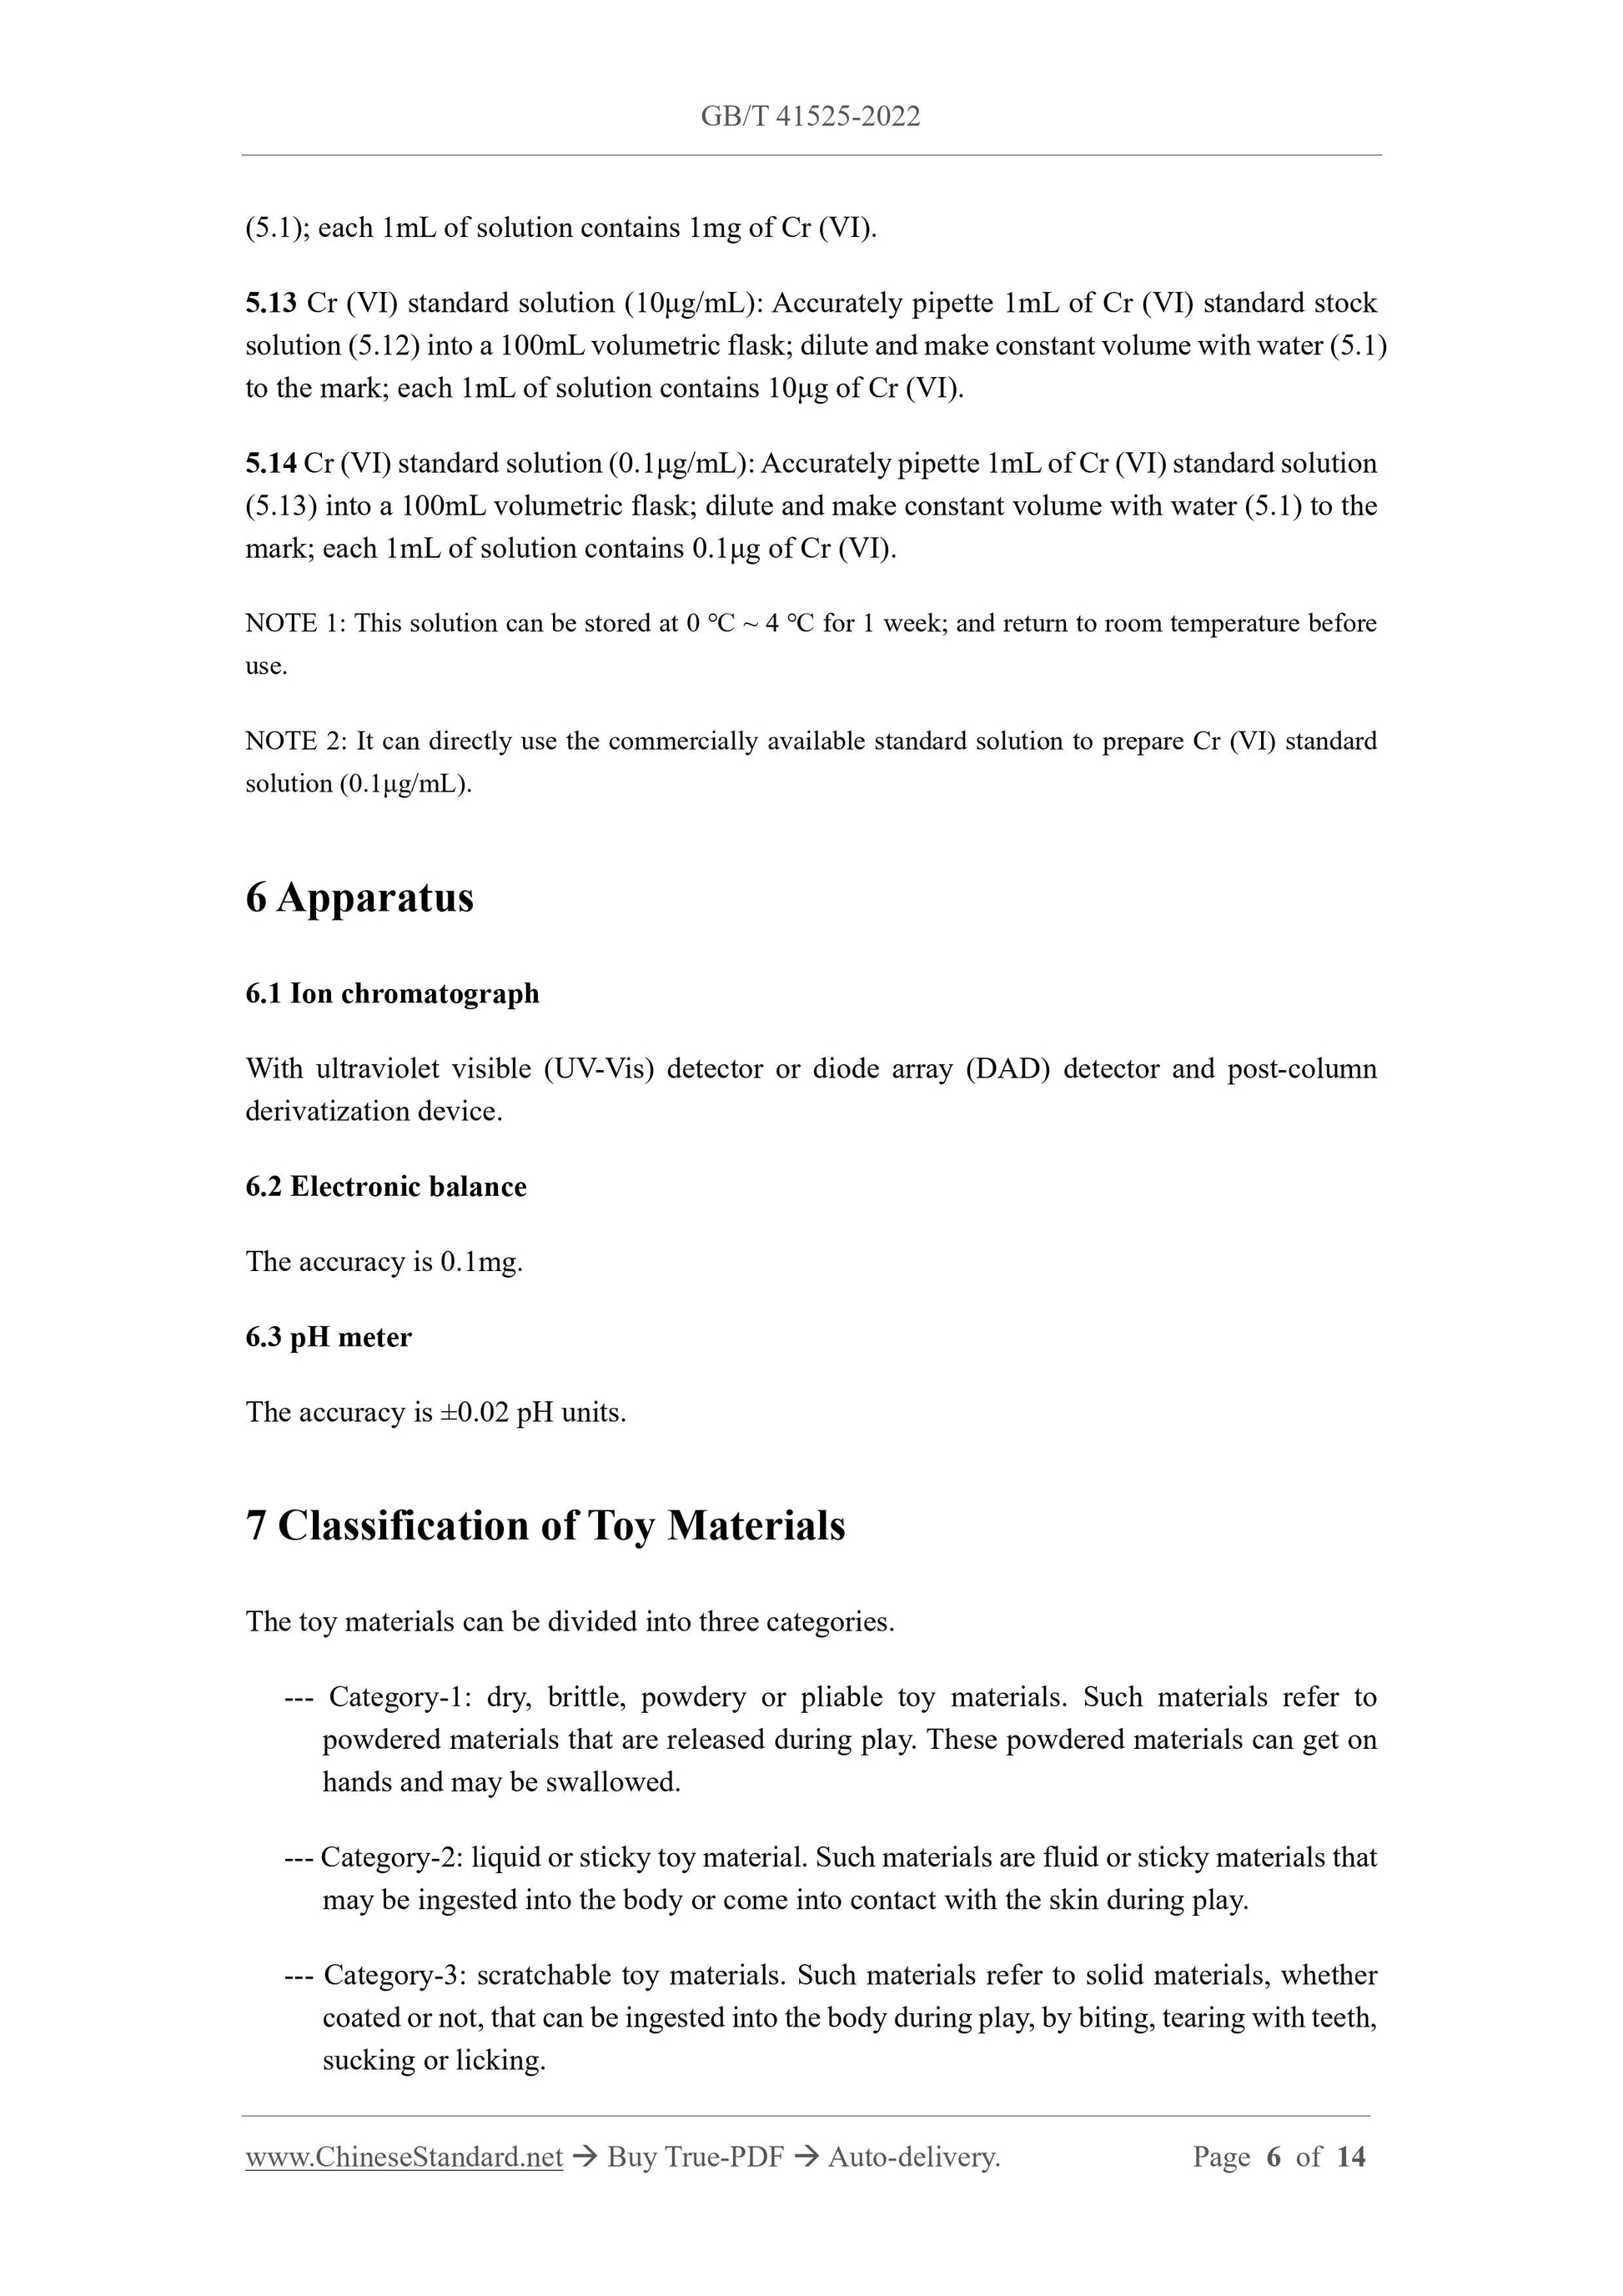 GB/T 41525-2022 Page 5